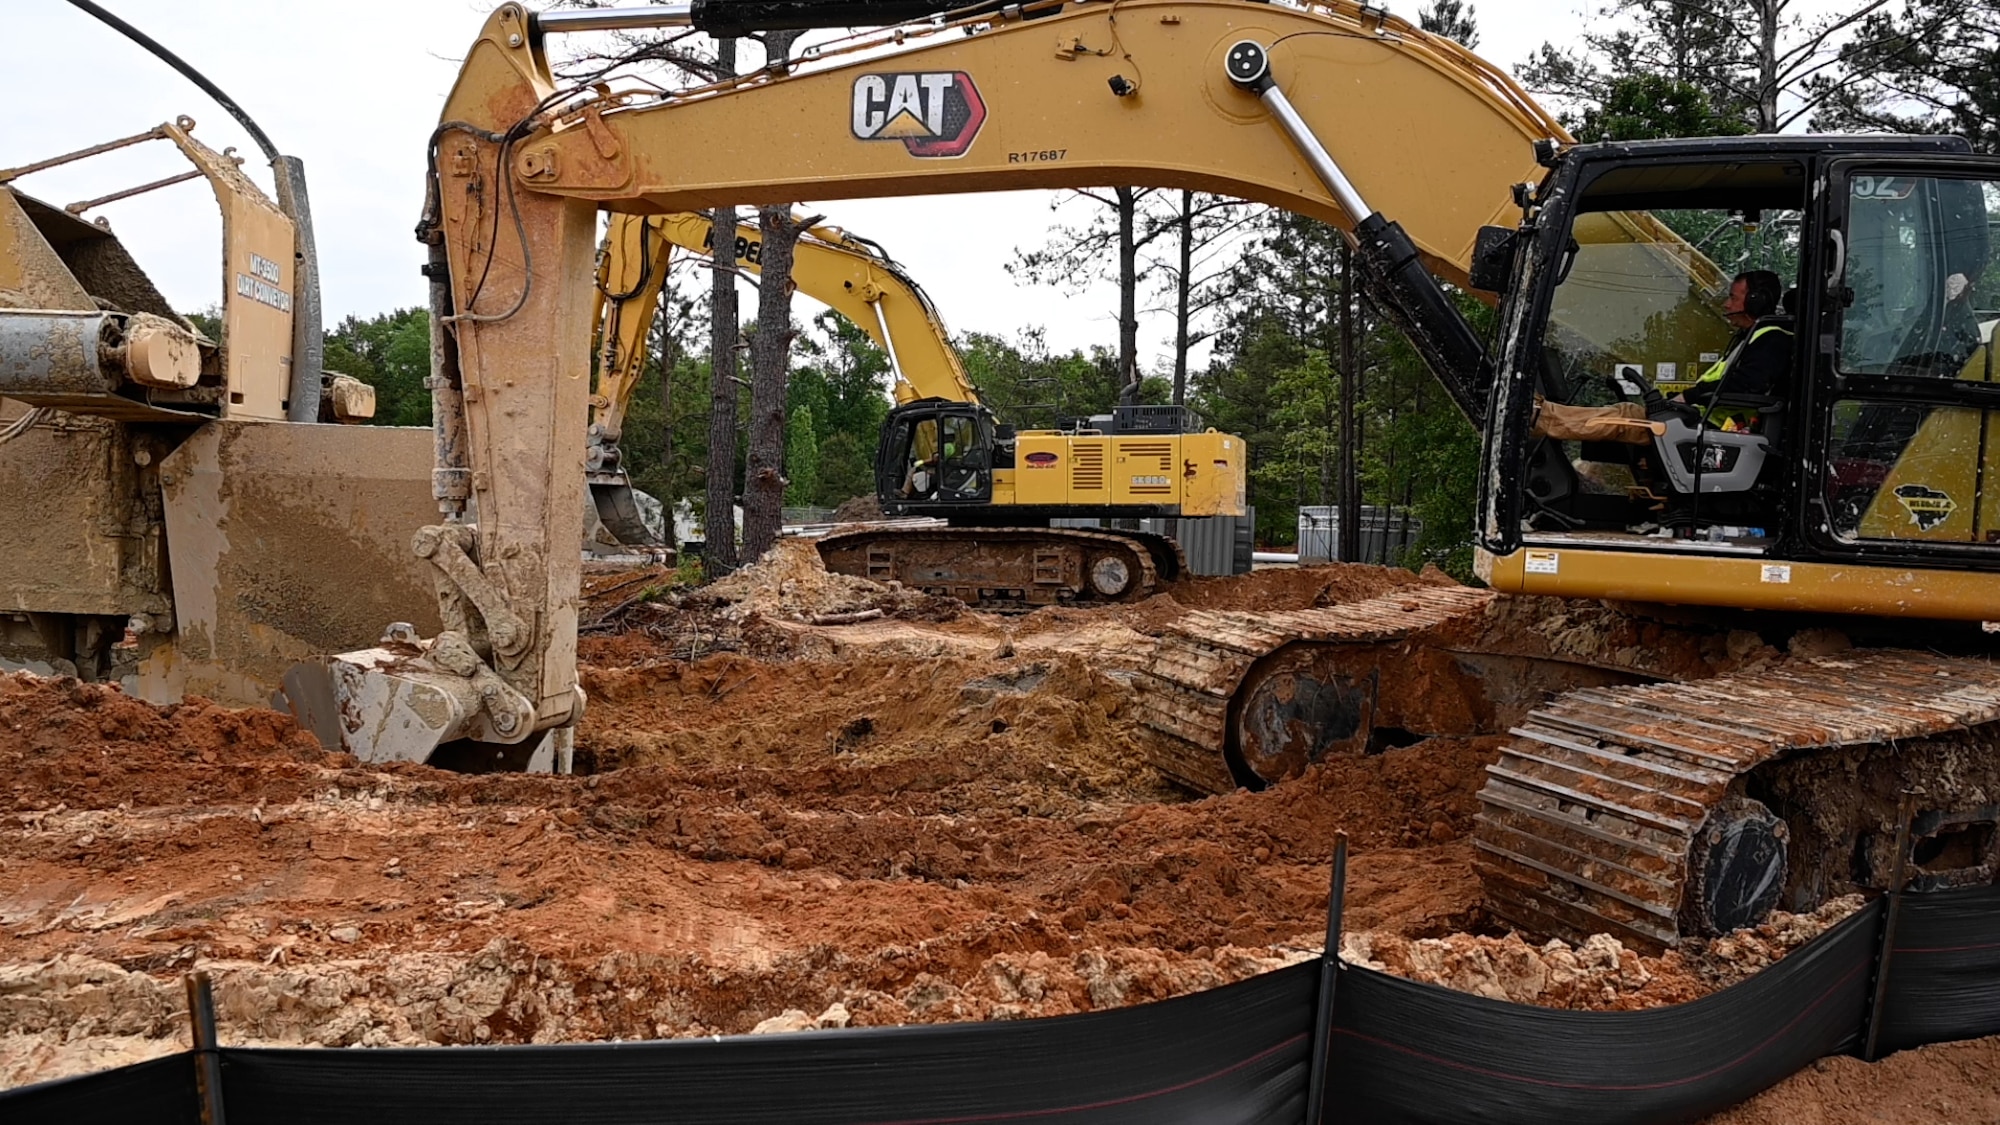 Construction workers use heavy machinery to build large trenches in the ground.